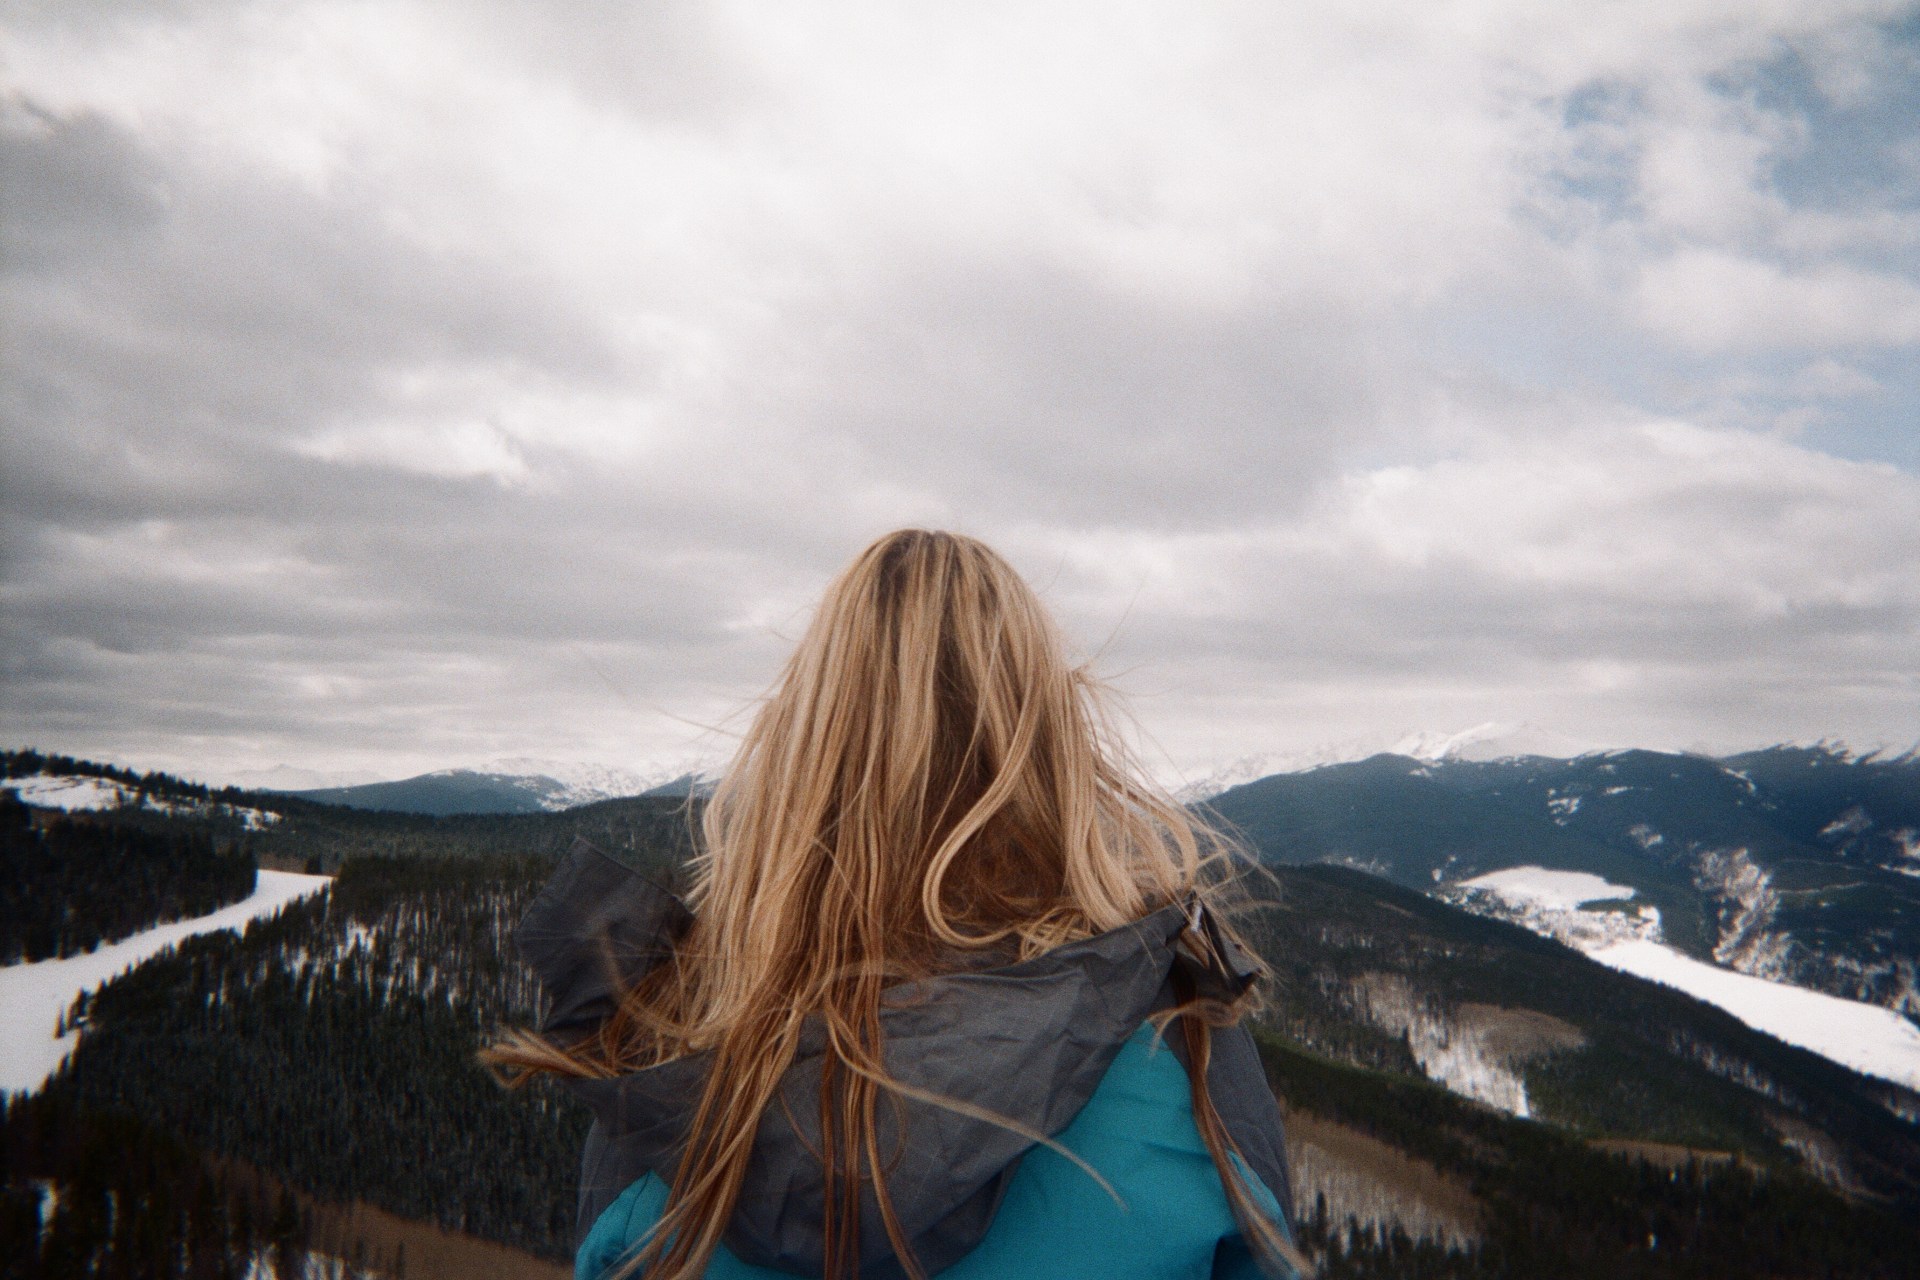 30 Things You Have To Check Off Your Bucket List Before Turning 30